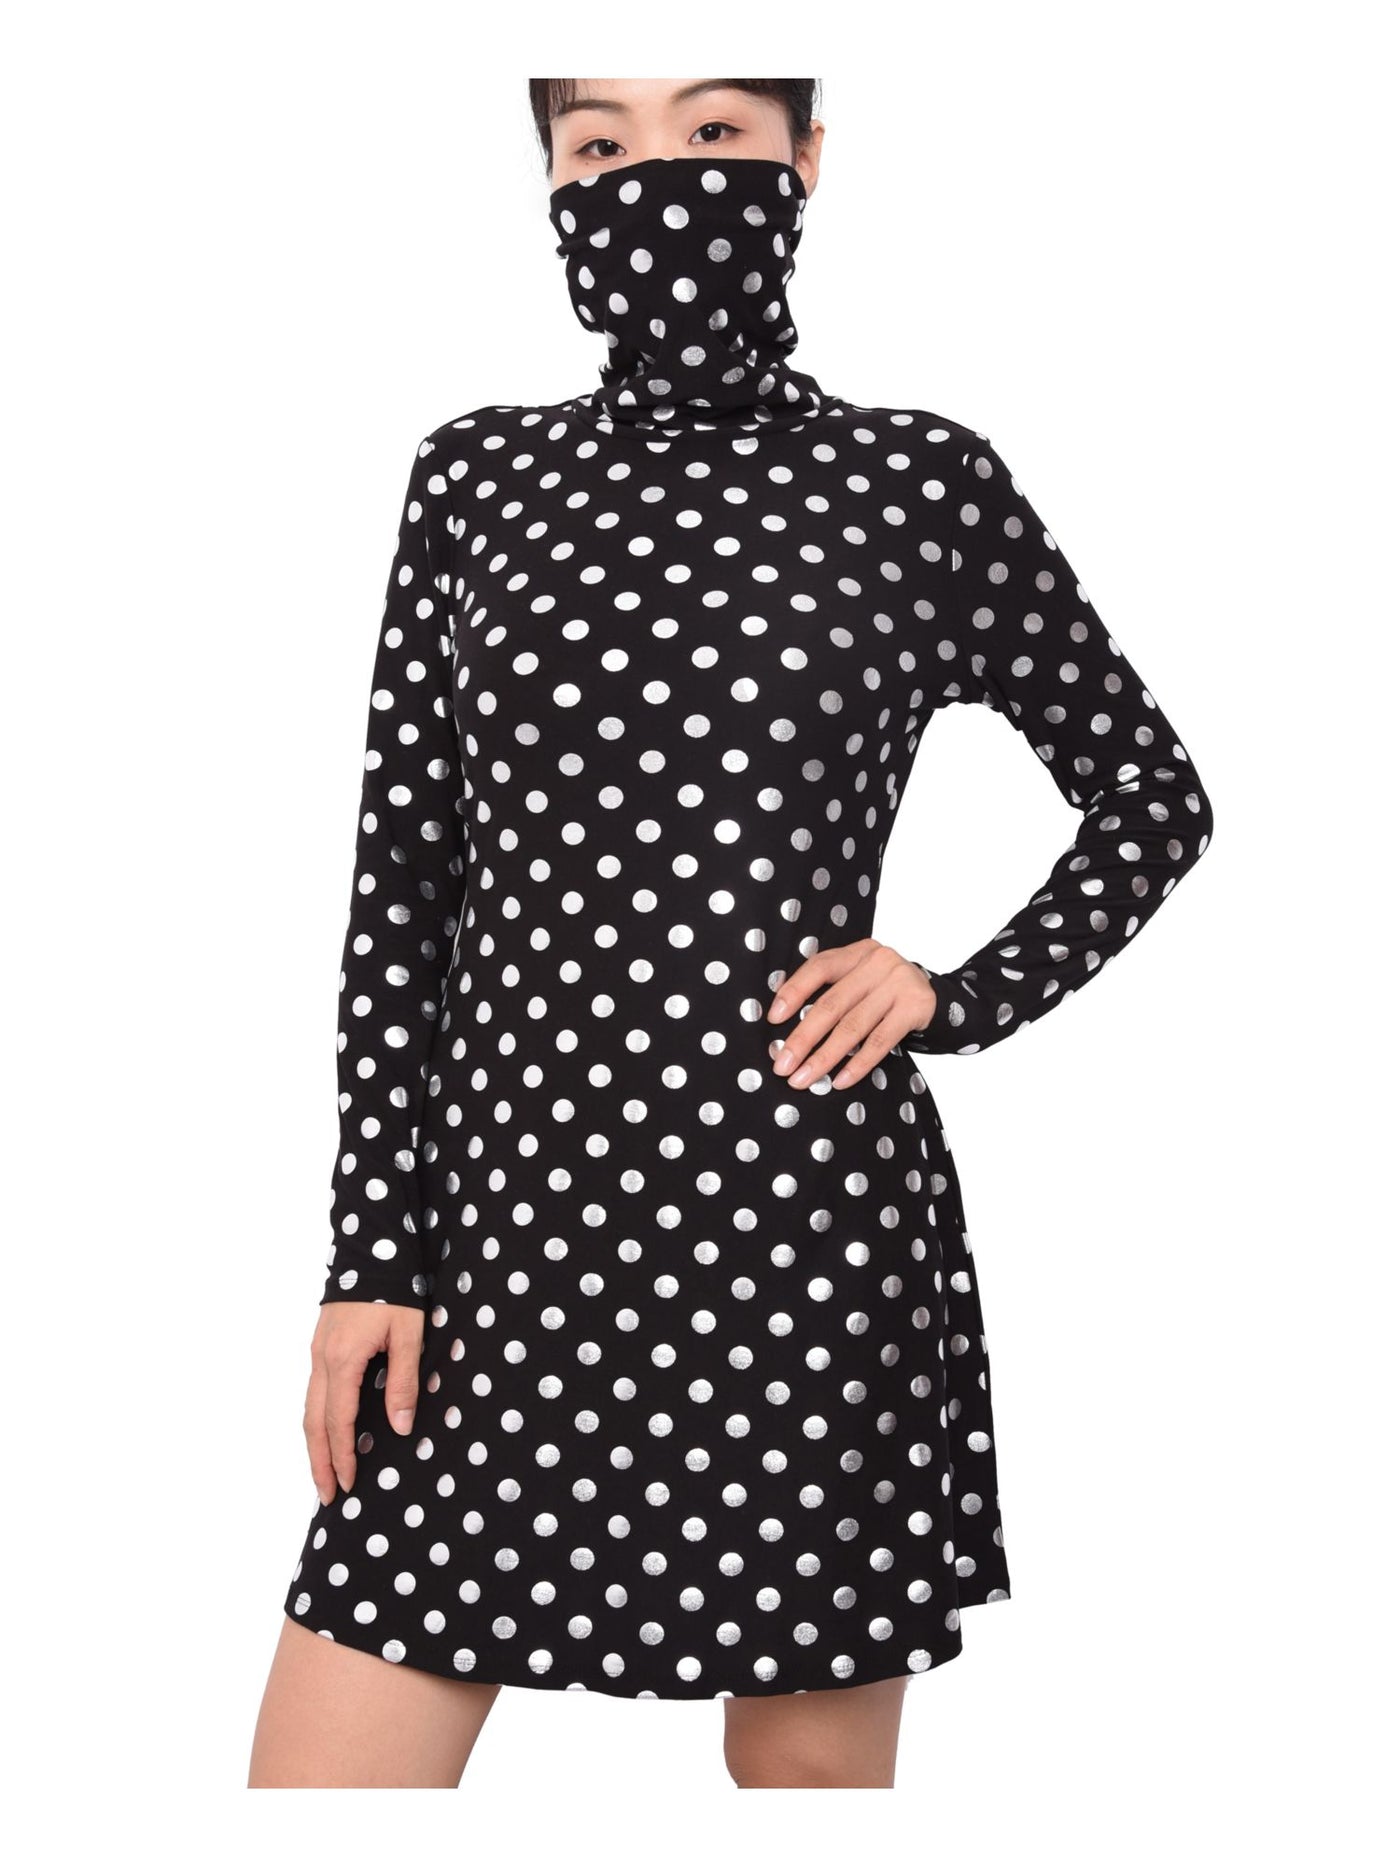 PLANET GOLD Womens Black Polka Dot Long Sleeve Turtle Neck Above The Knee Fit + Flare Dress XS